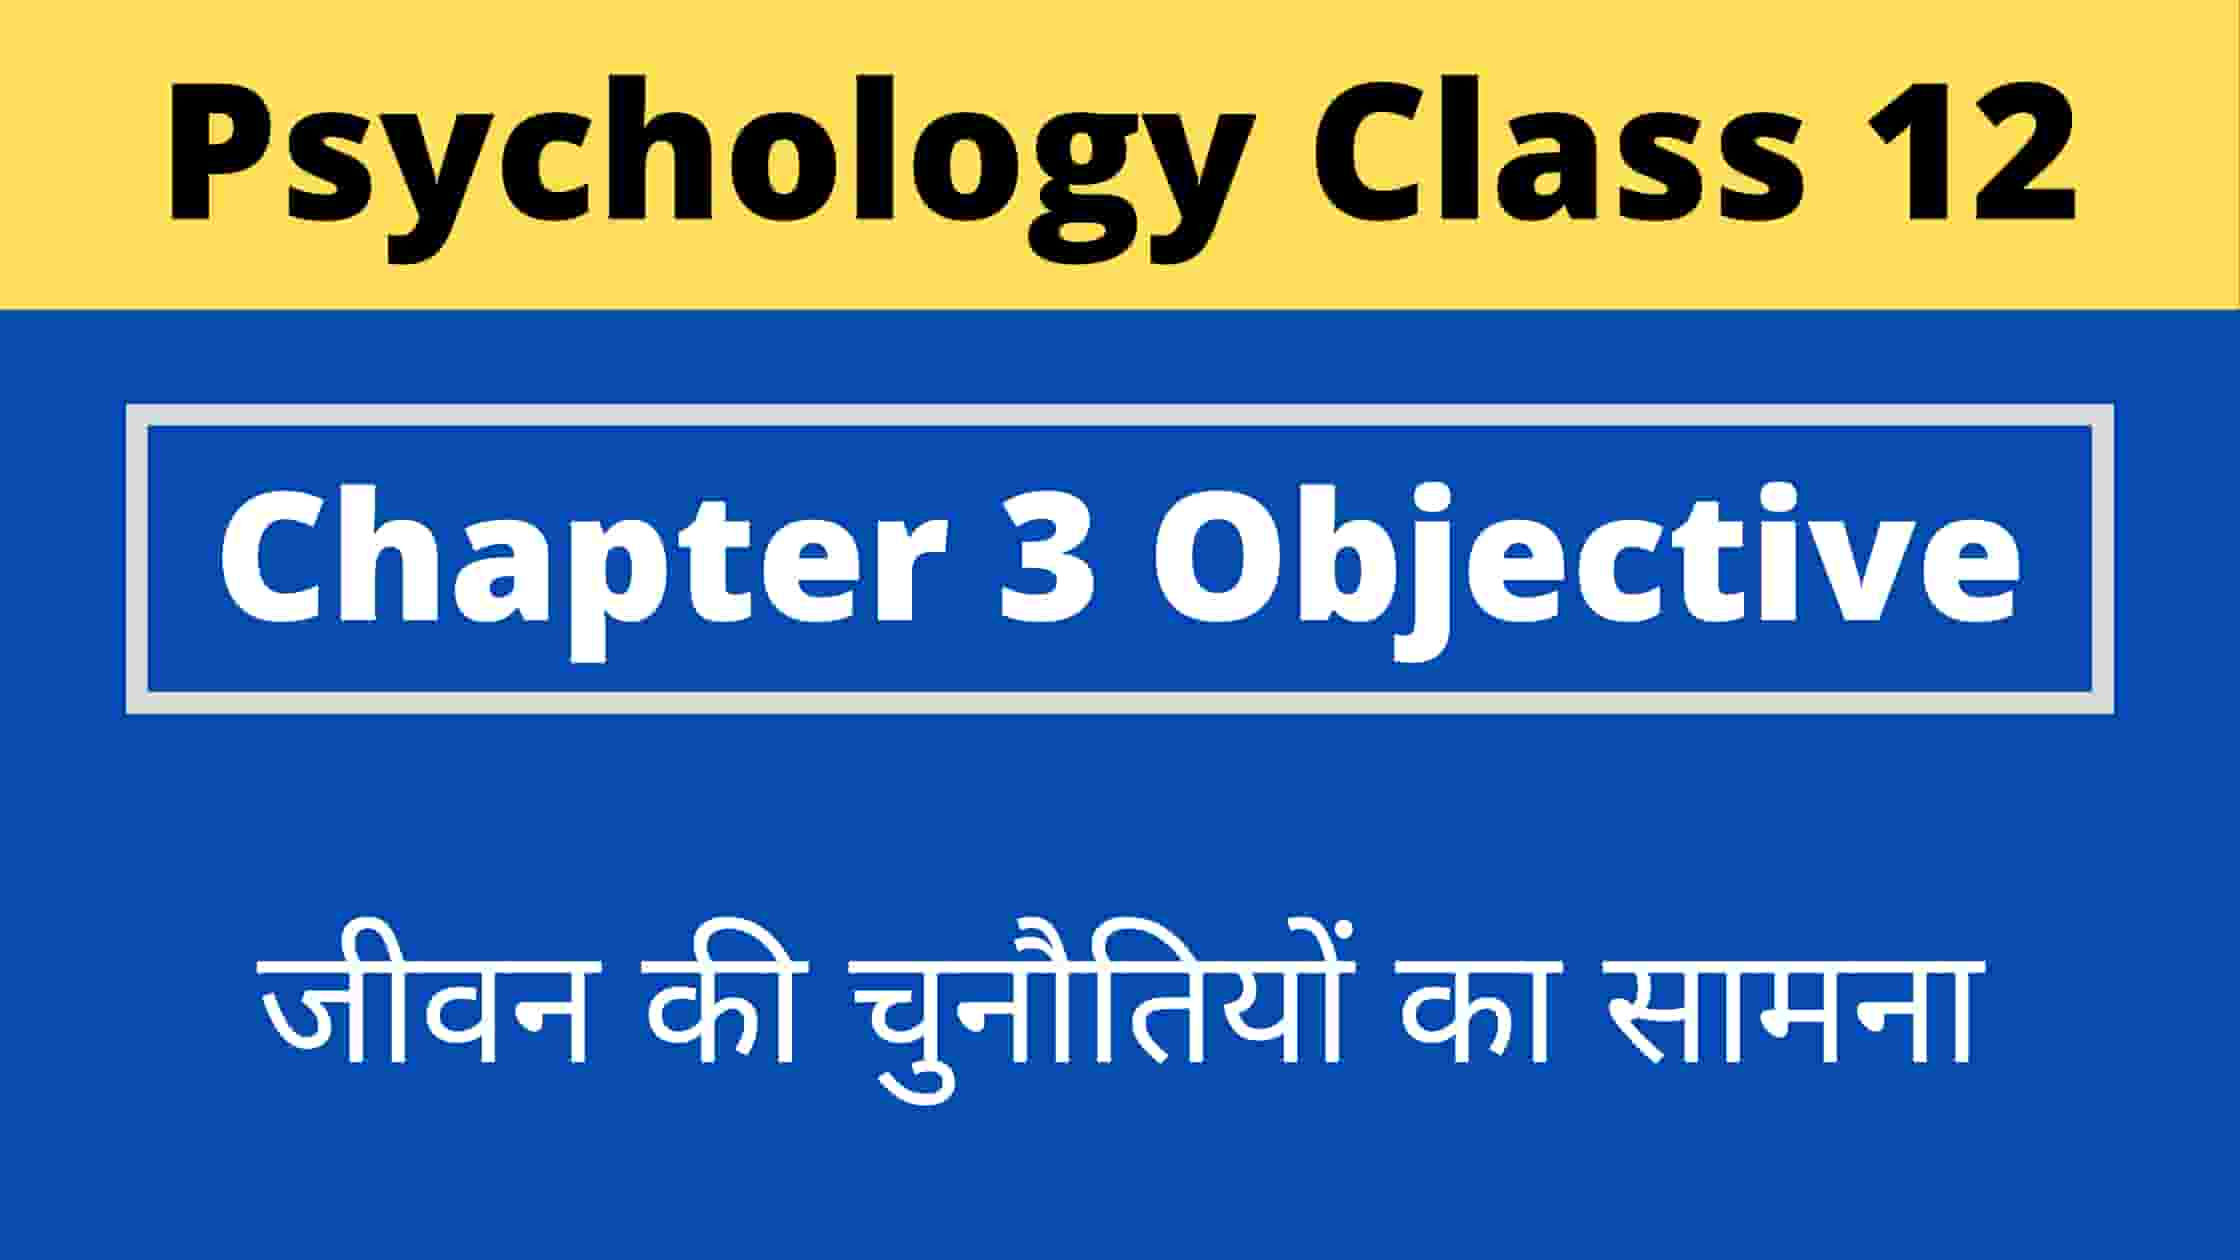 You are currently viewing Psychology Class 12 Chapter 3